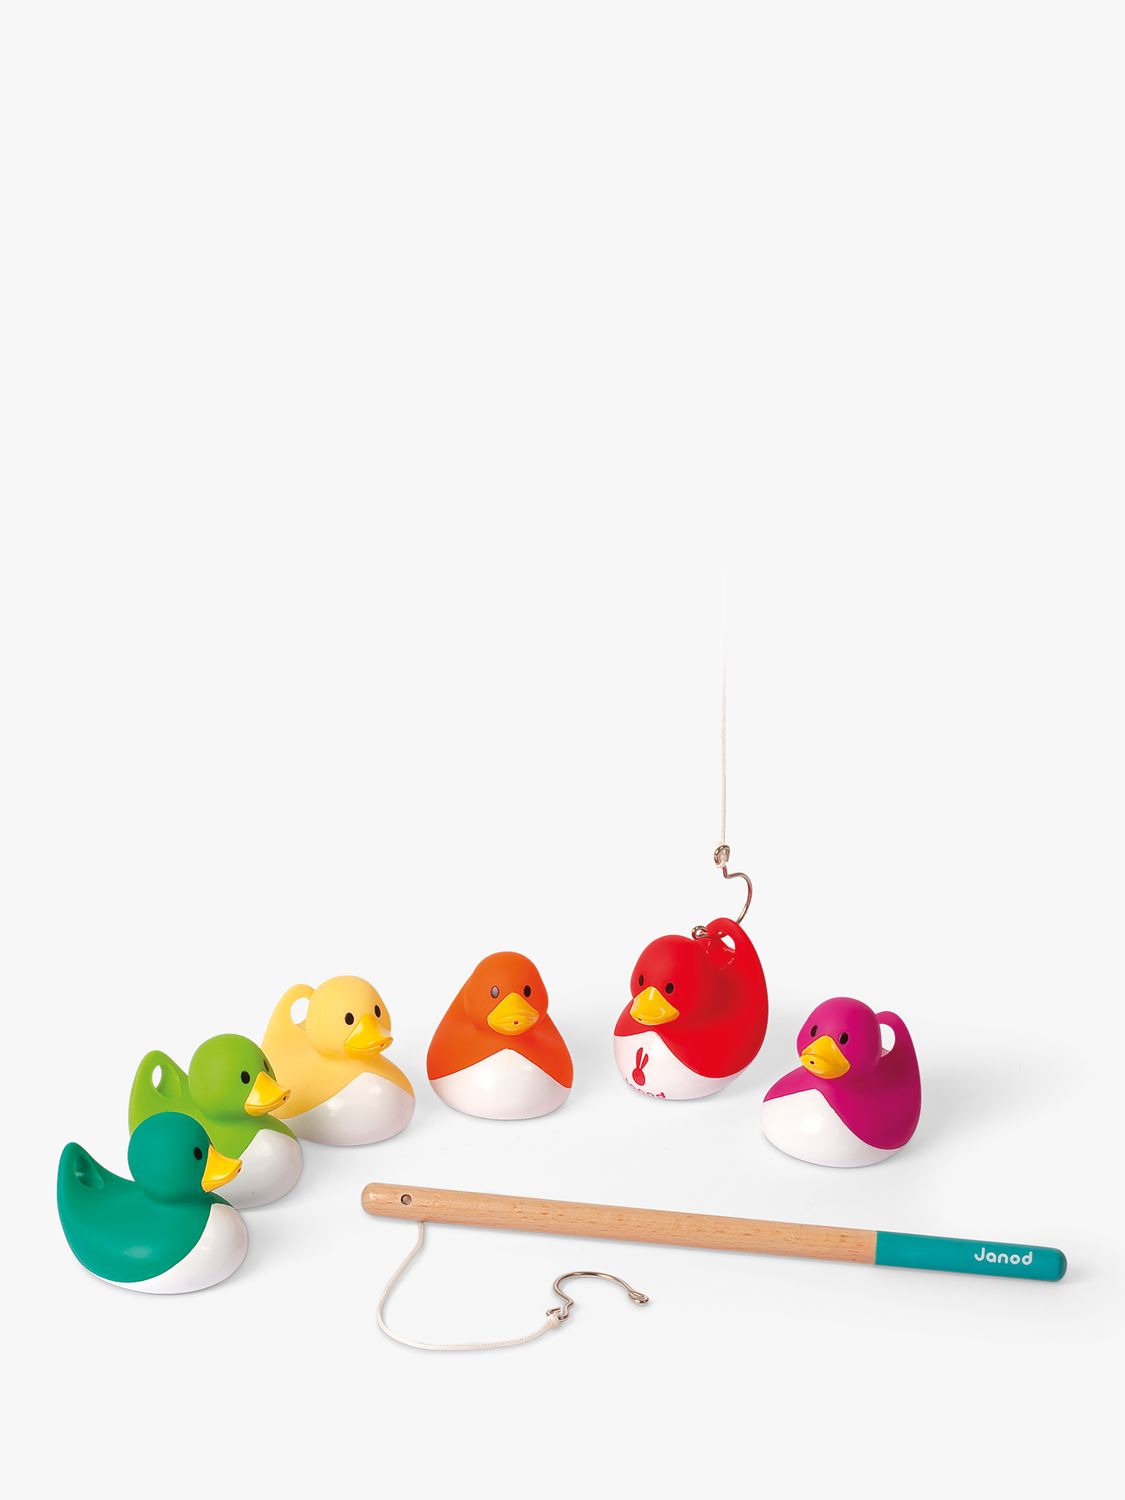 𝐃𝐮𝐜𝐤 𝐅𝐢𝐬𝐡𝐢𝐧𝐠 𝐓𝐨𝐲🐥🐠 Catching fish is made simple by